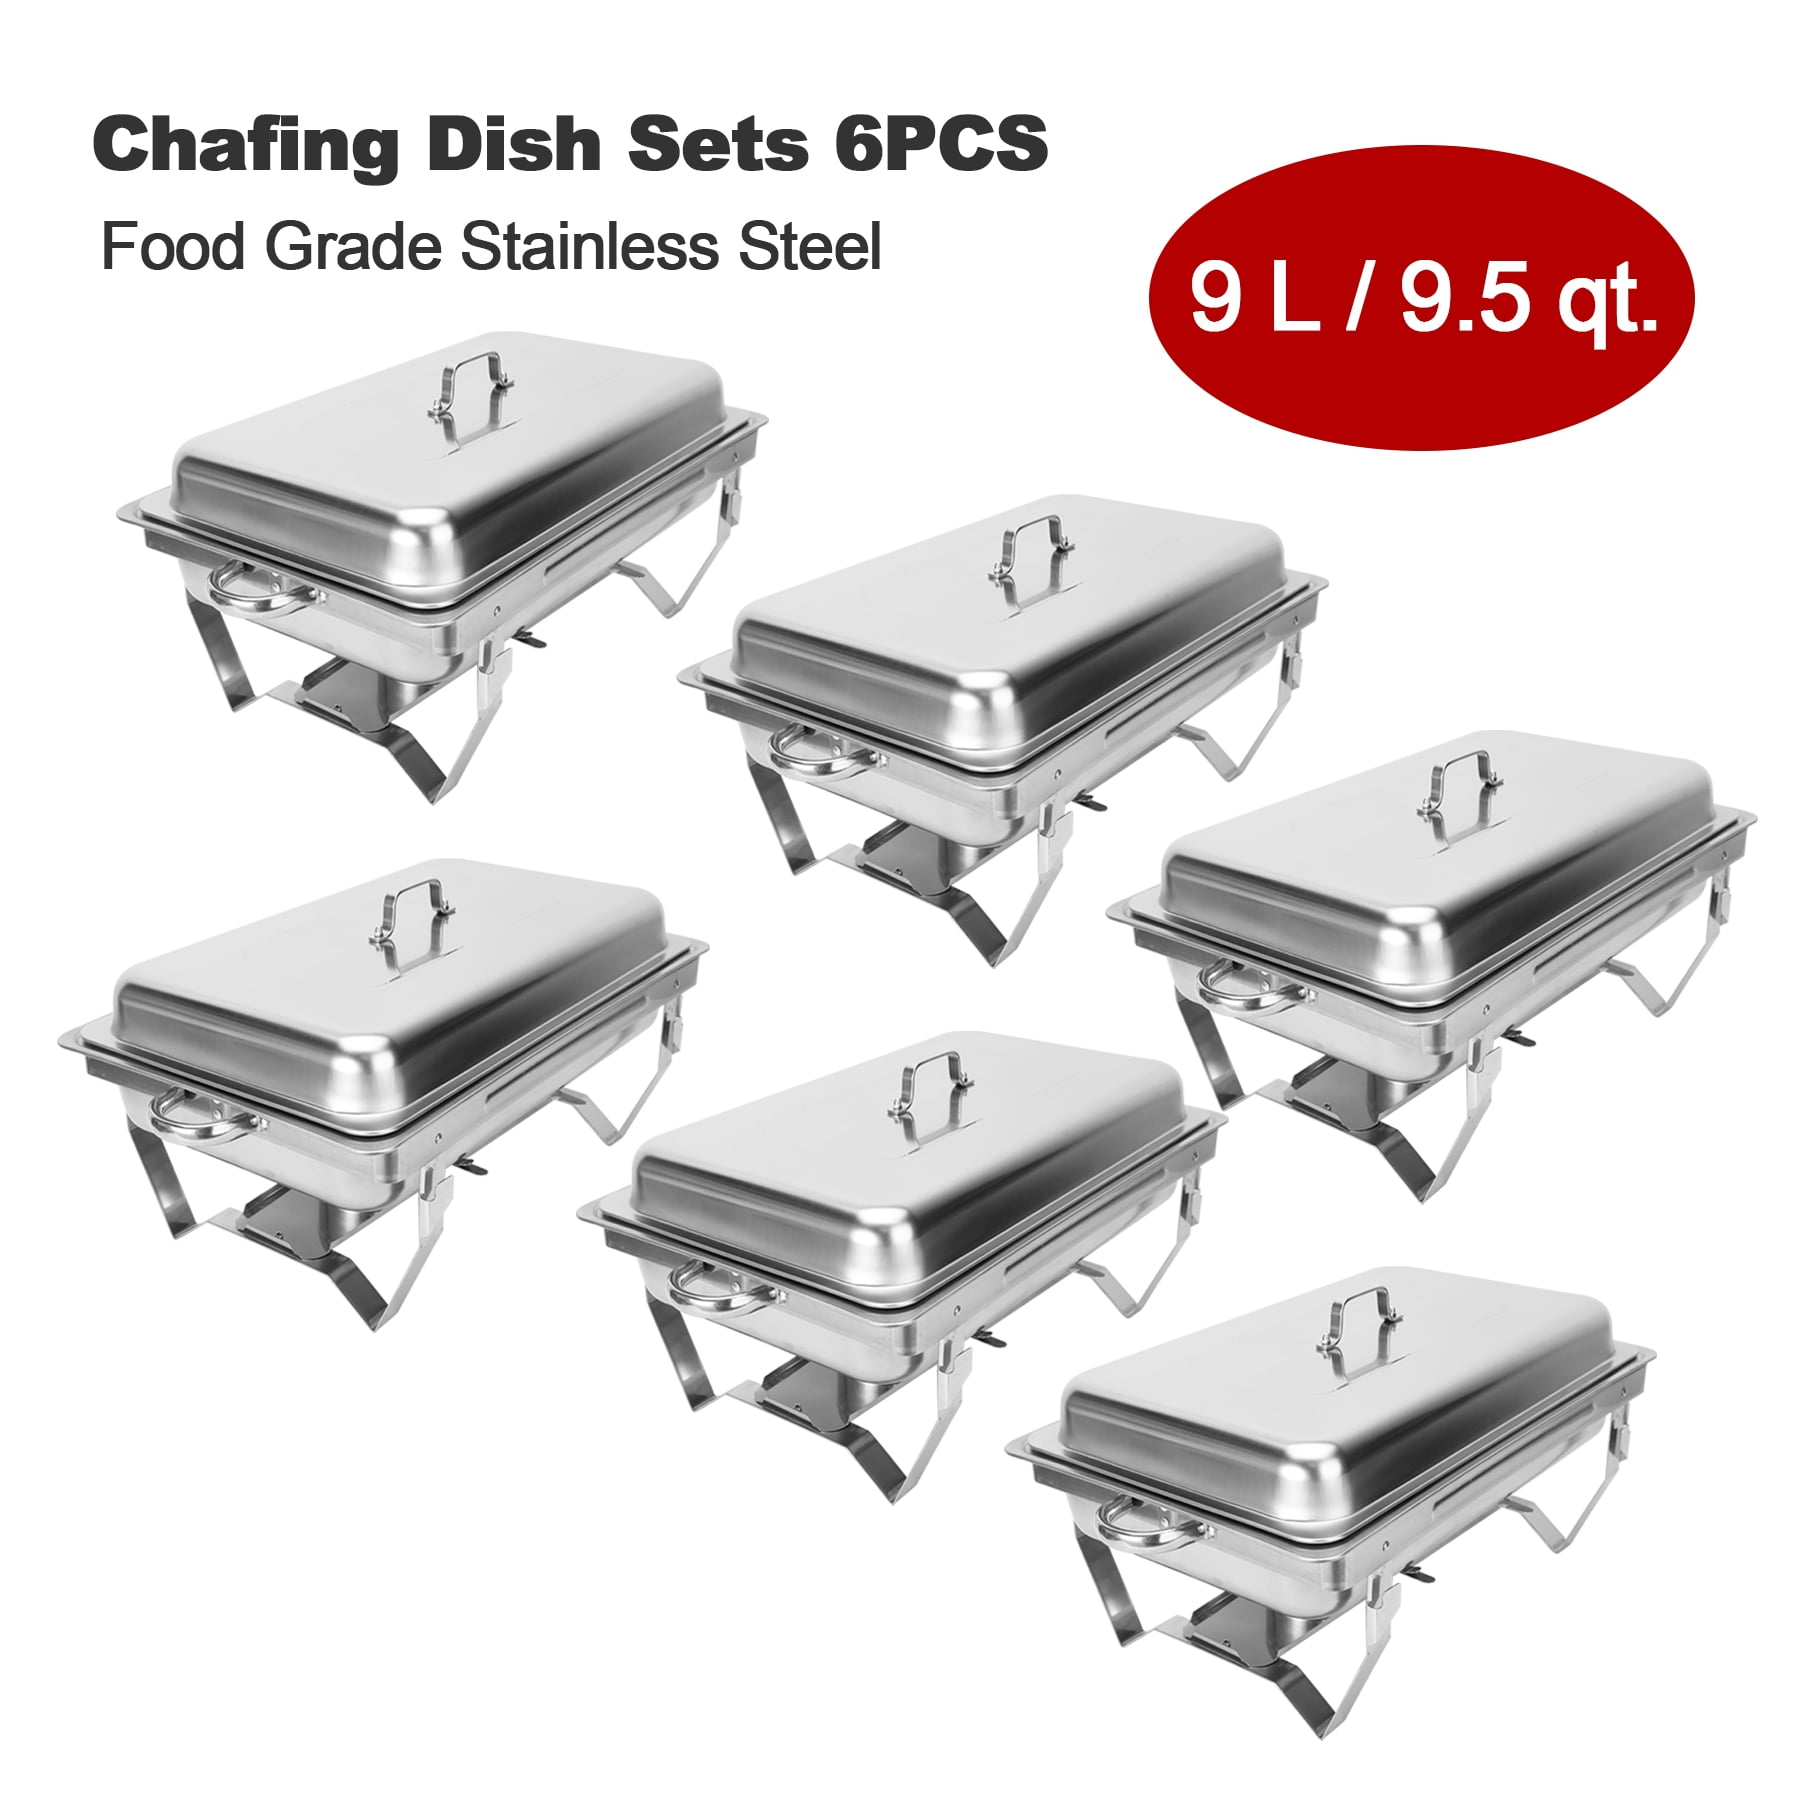 6 Pack Catering Stainless Steel Chafer Chafing Dish Sets 8QT Buffet 